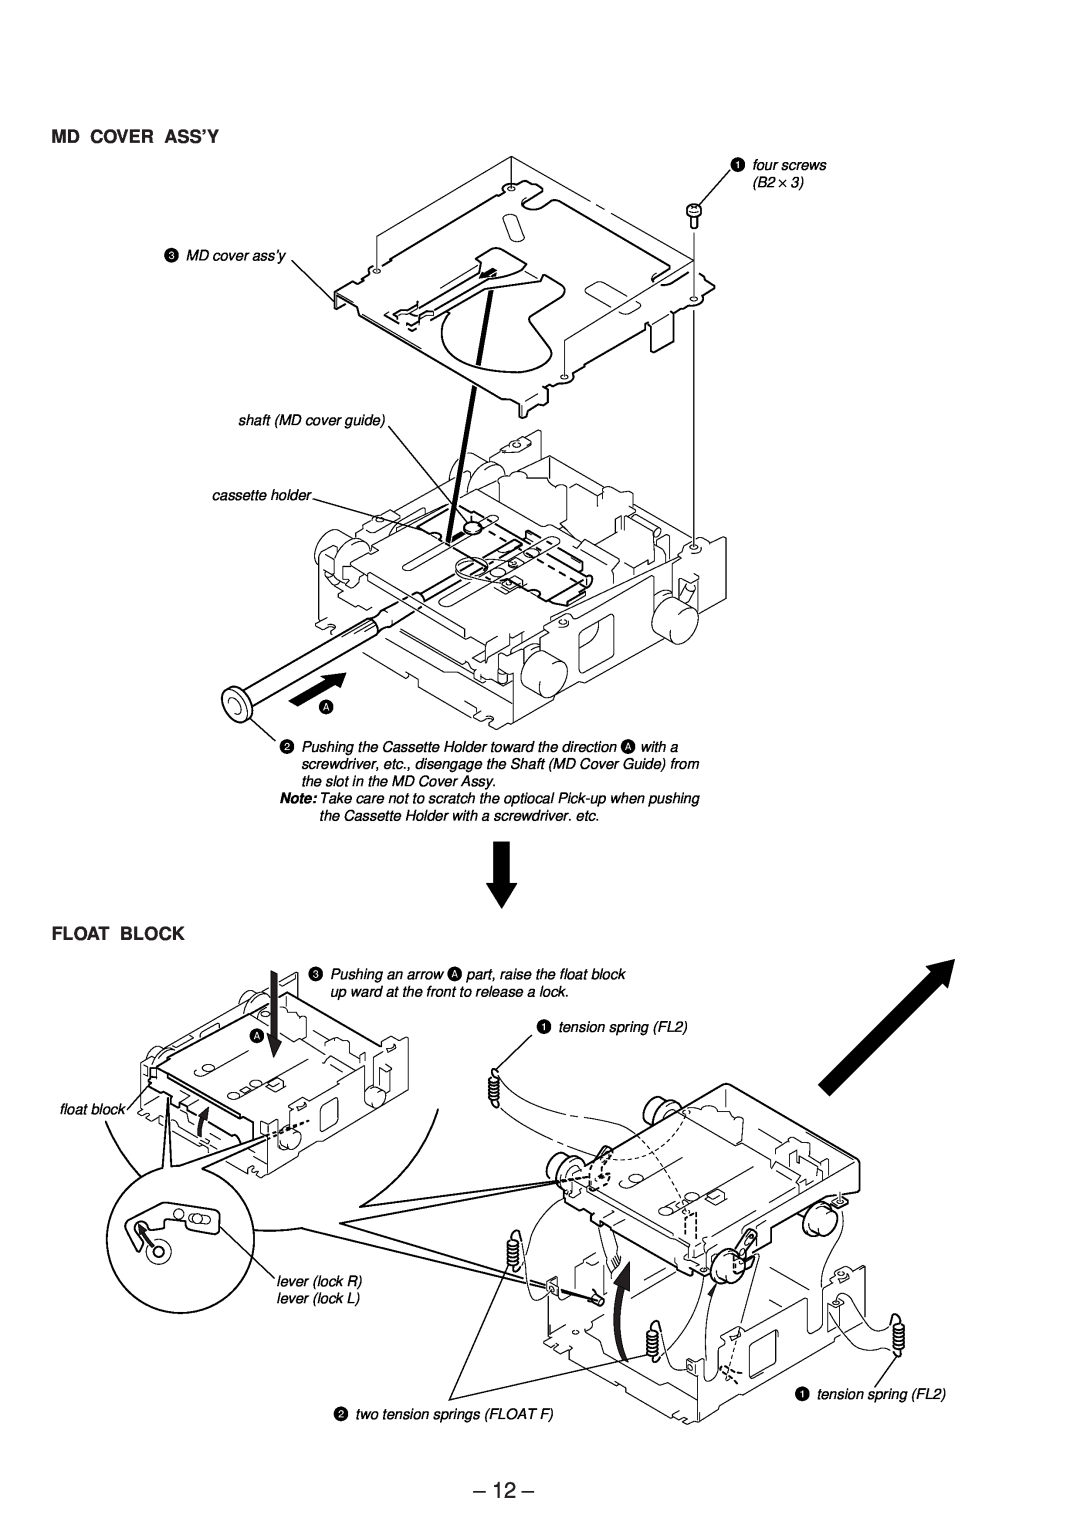 Sony MDX-C5970R service manual 12, Md Cover Ass’Y, Float Block 